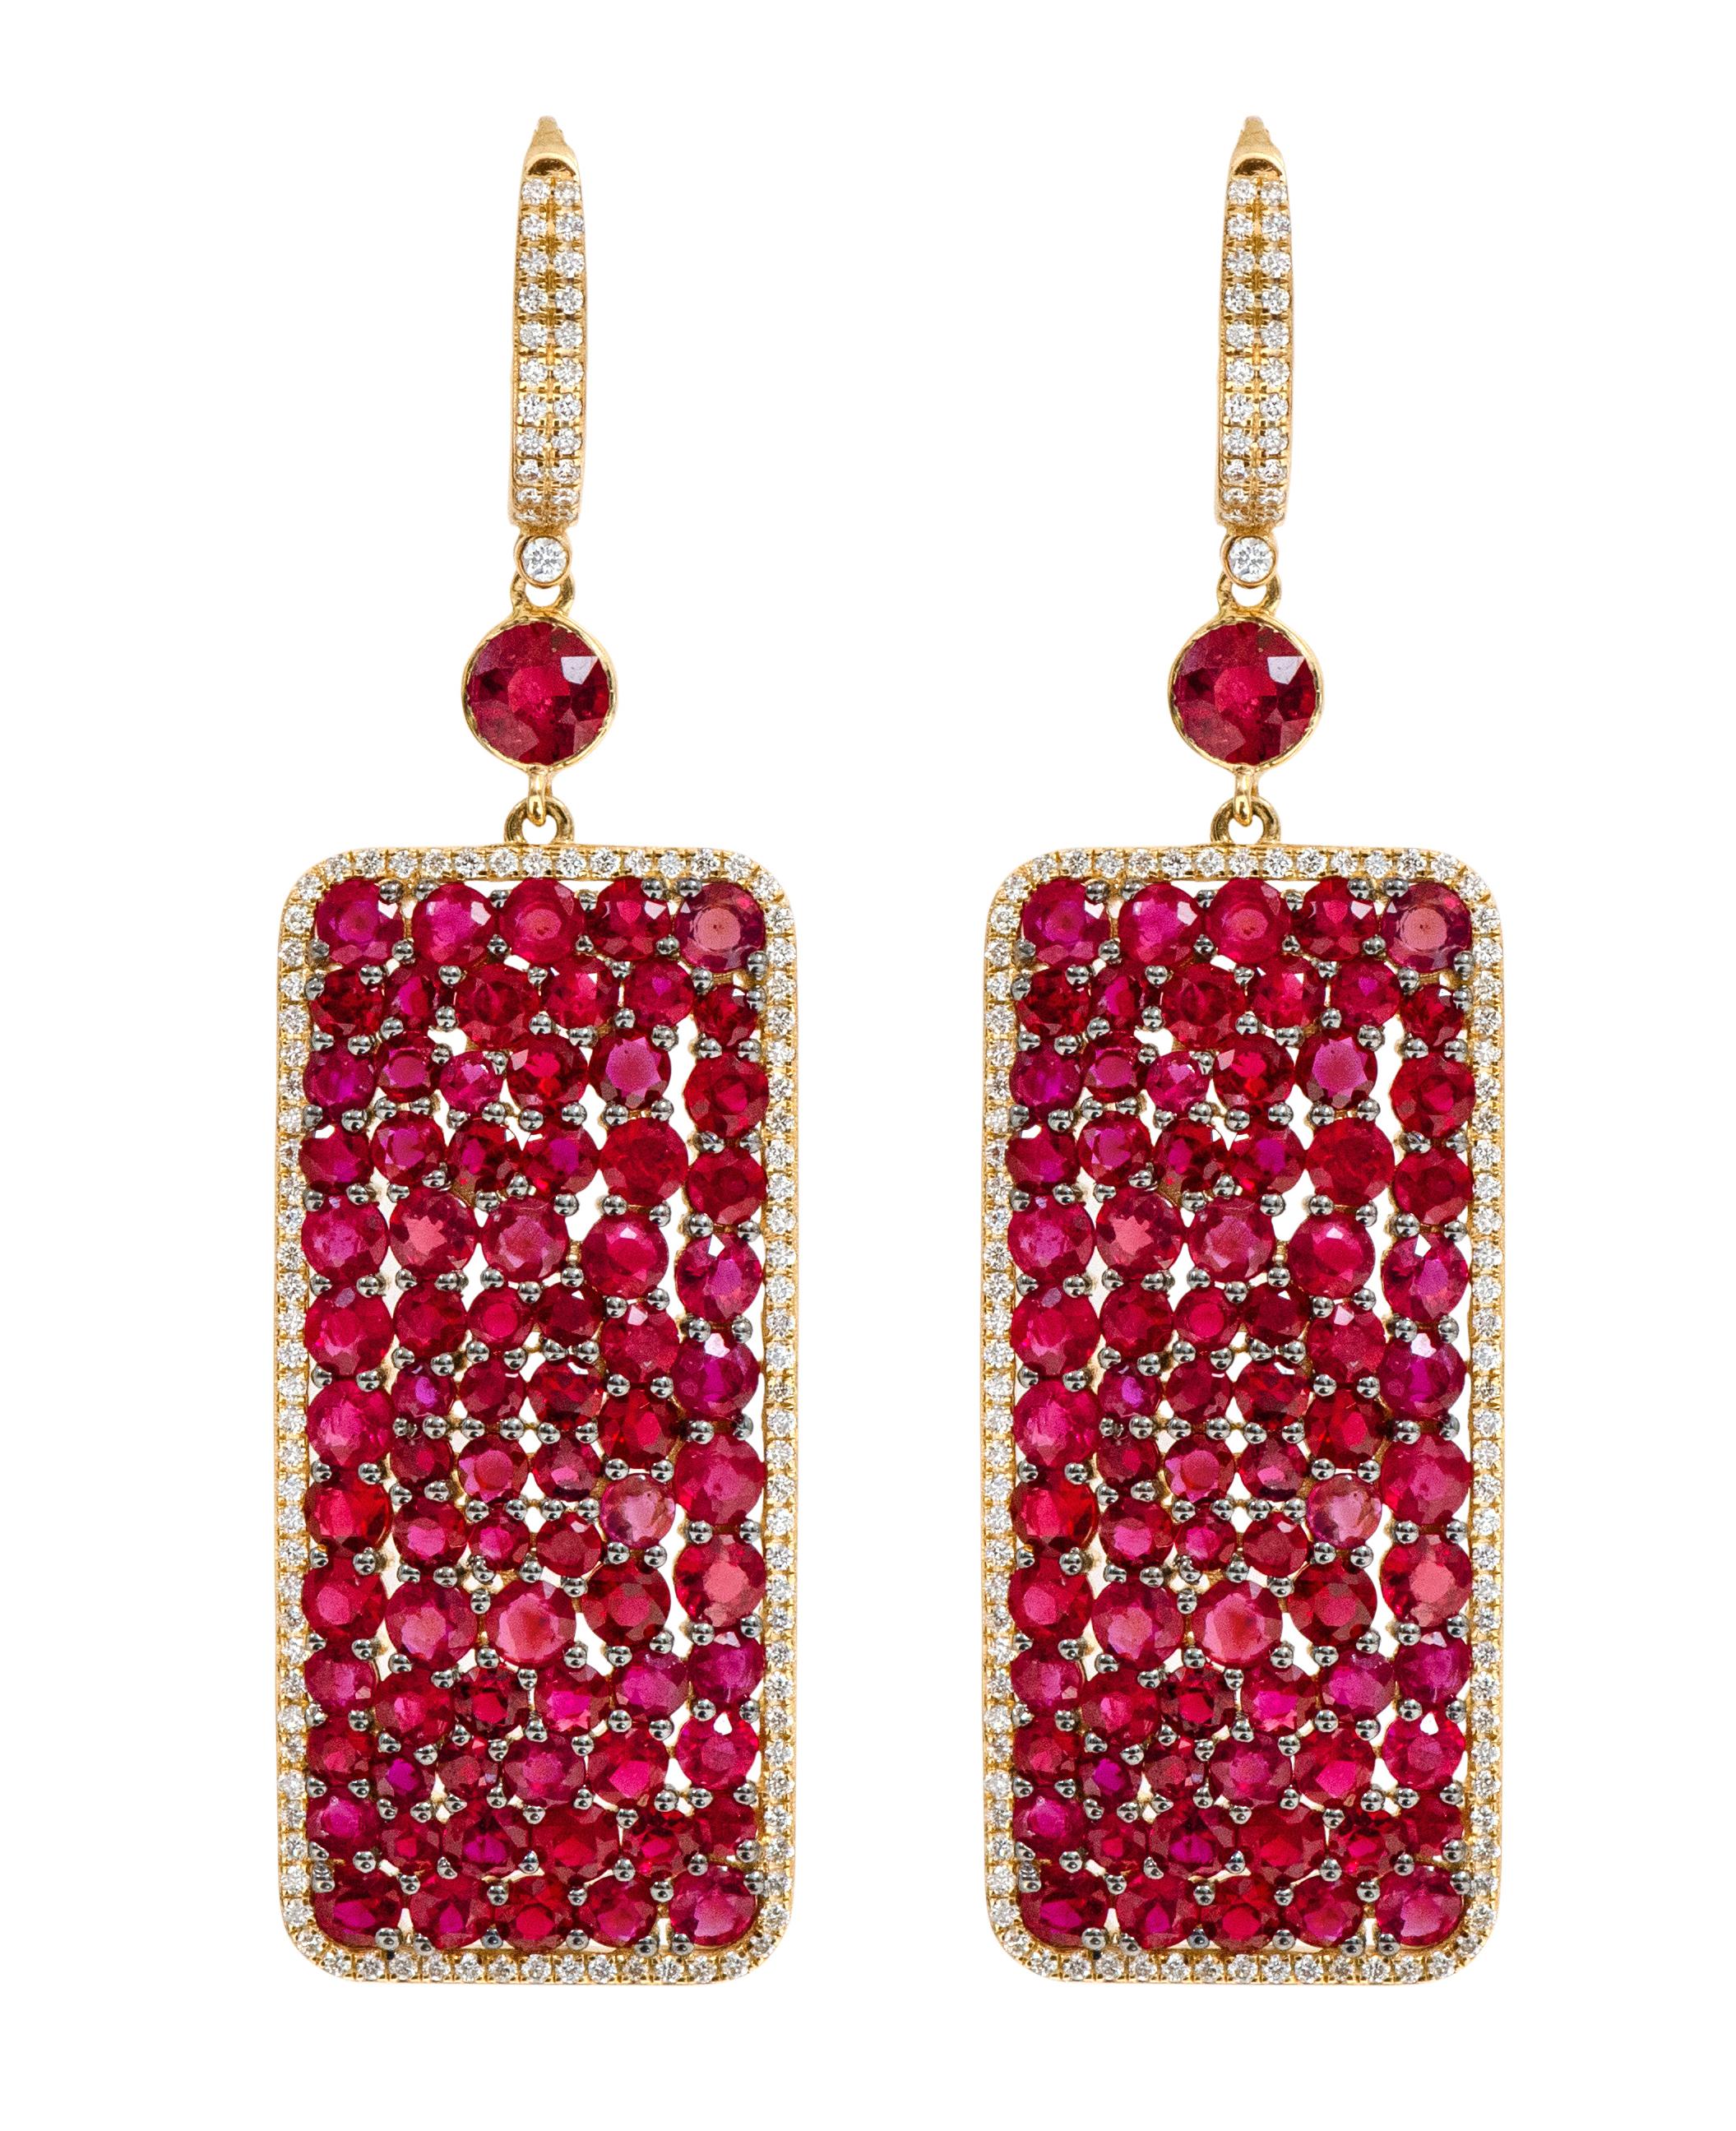 Contemporary 18 Karat Yellow Gold 16.35 Carat Ruby and Diamond Drop Earrings For Sale